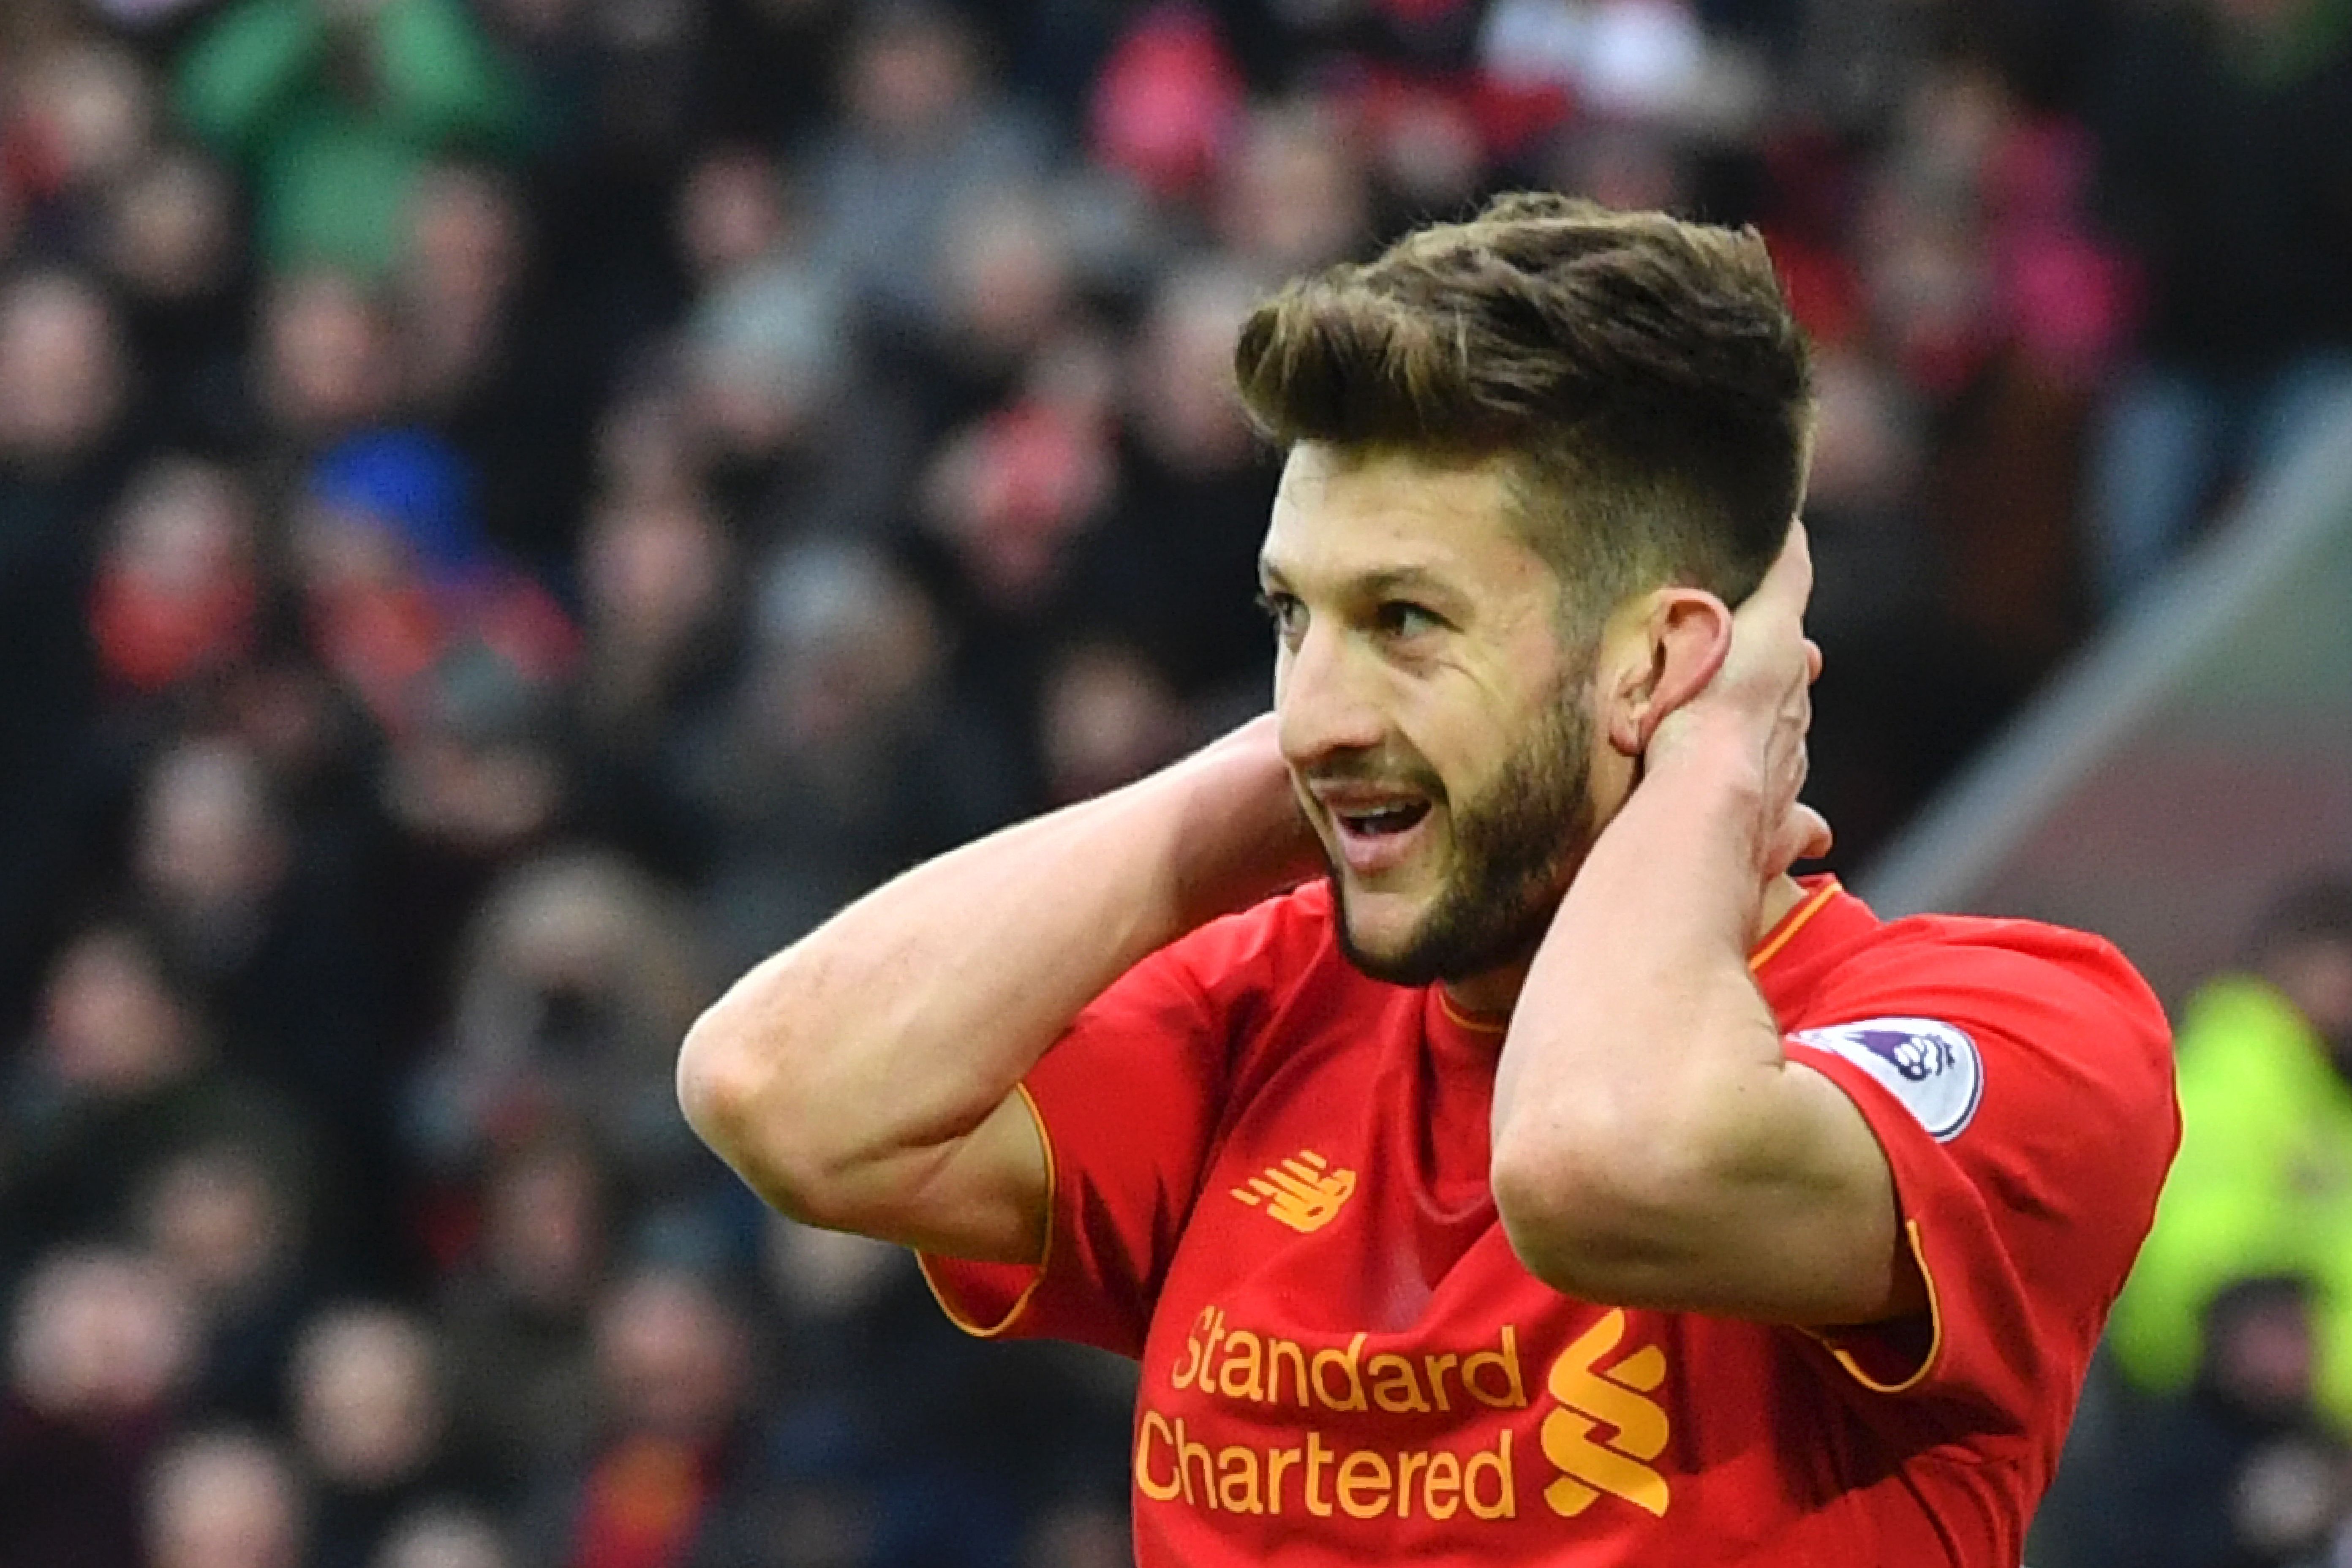 Liverpool's English midfielder Adam Lallana reacts after a missed chance during the English Premier League football match between Liverpool and Swansea City at Anfield in Liverpool, north west England on January 21, 2017. (Photo by Anthony Devlin/AFP/Getty Images)